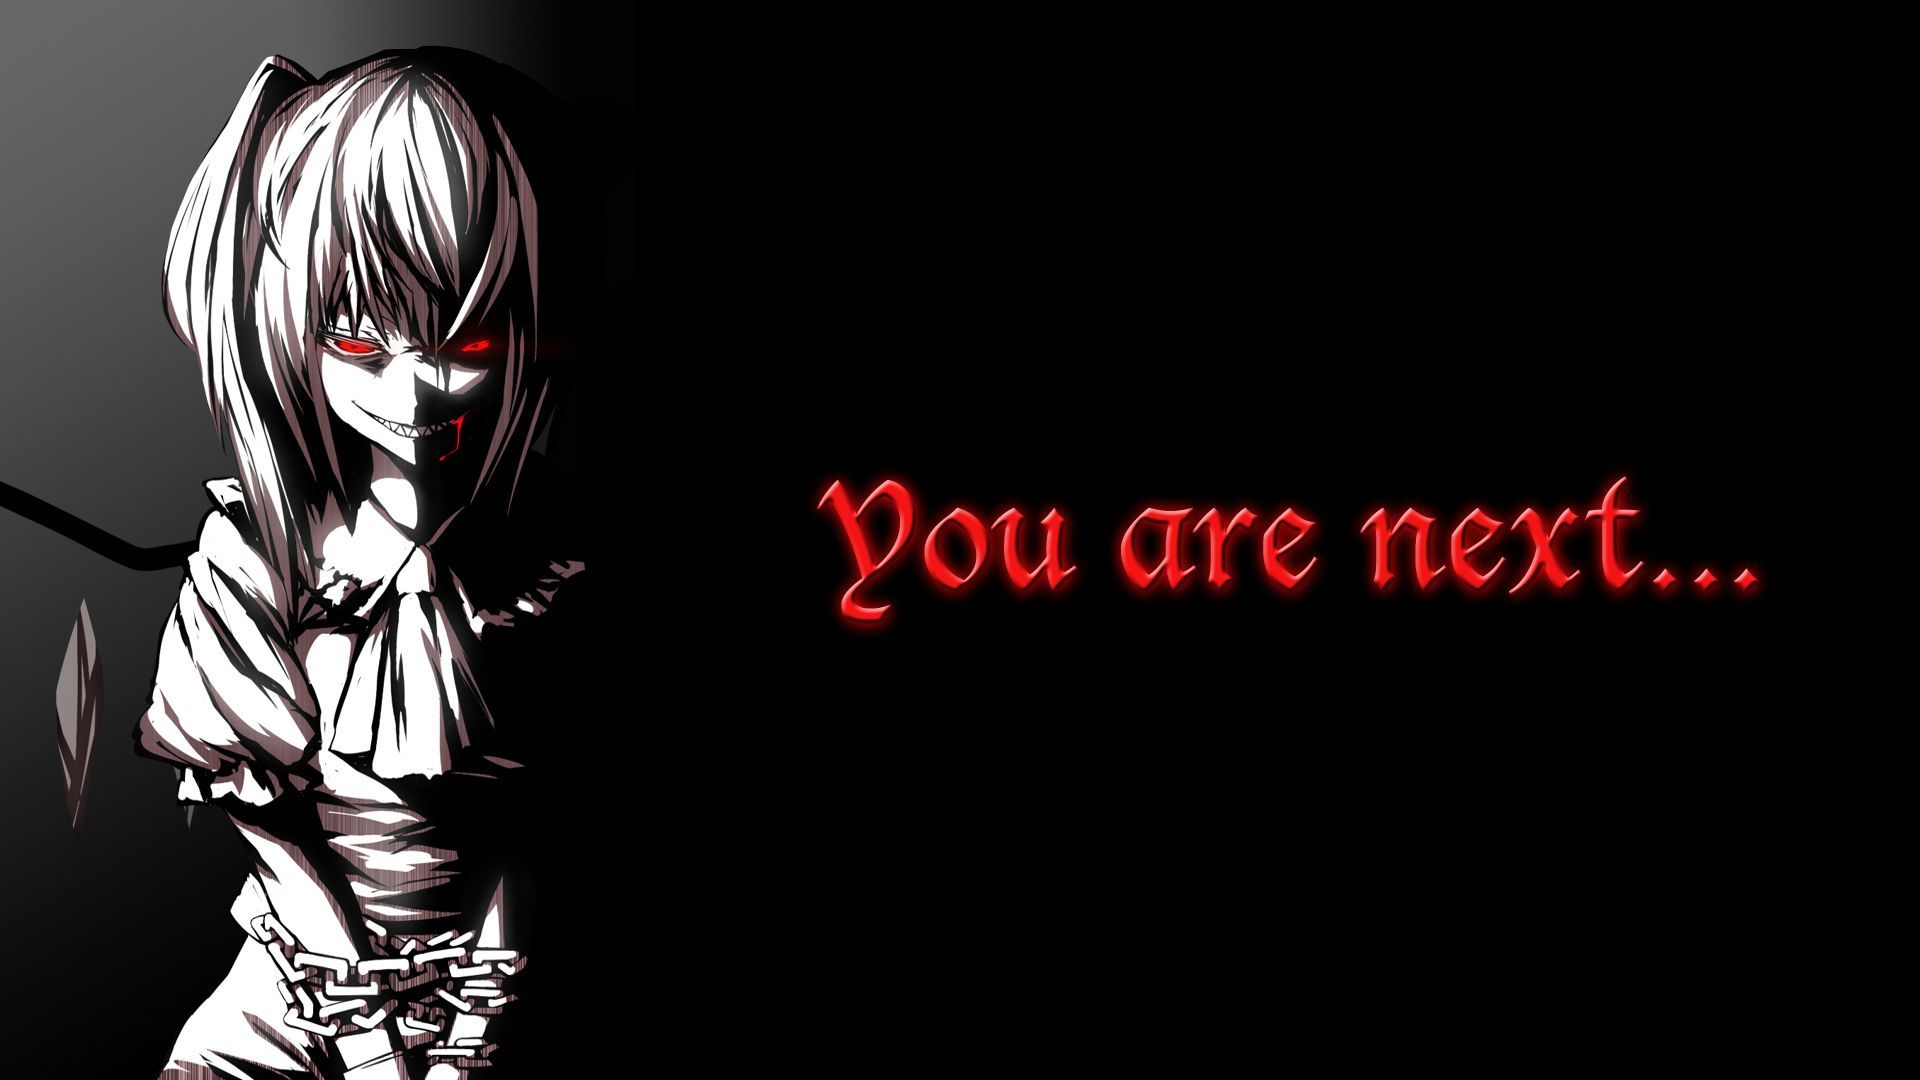 Suicidal Blooded Anime Girl Wallpapers - Wallpaper Cave